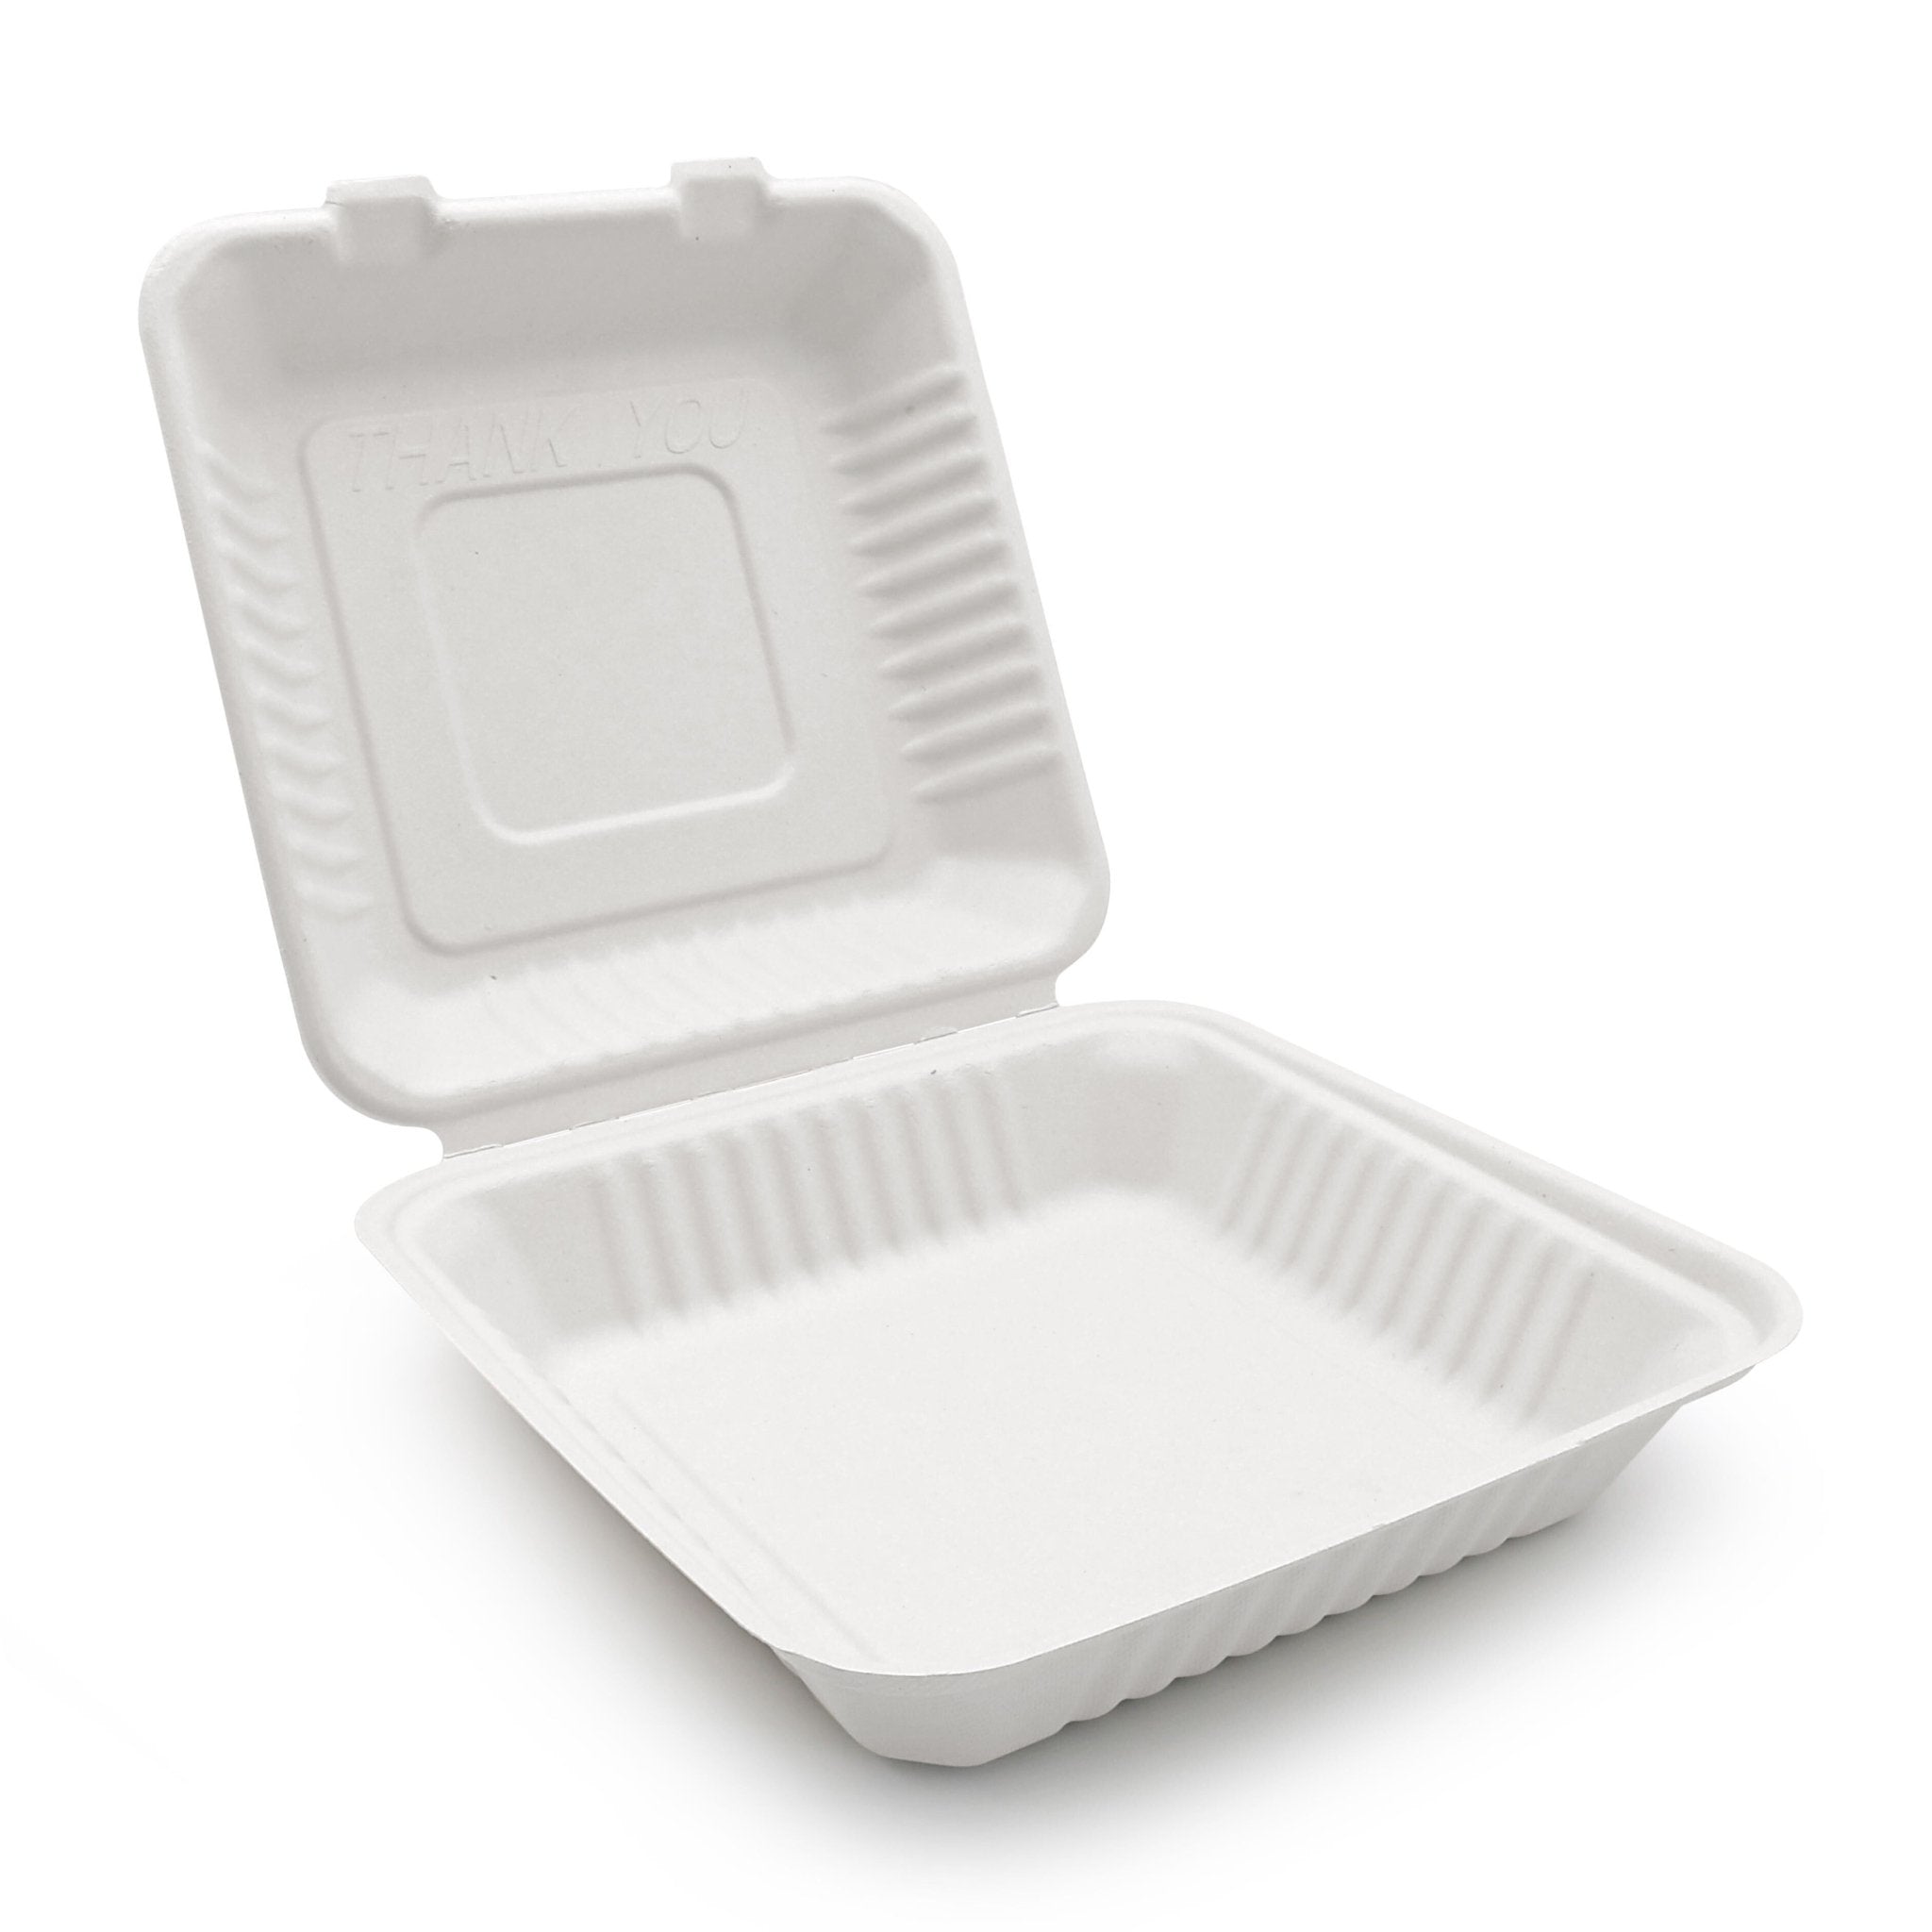 Bagasse Hinged Container, White, PFAS FREE, 9" x 9", 200pc - Feast Source